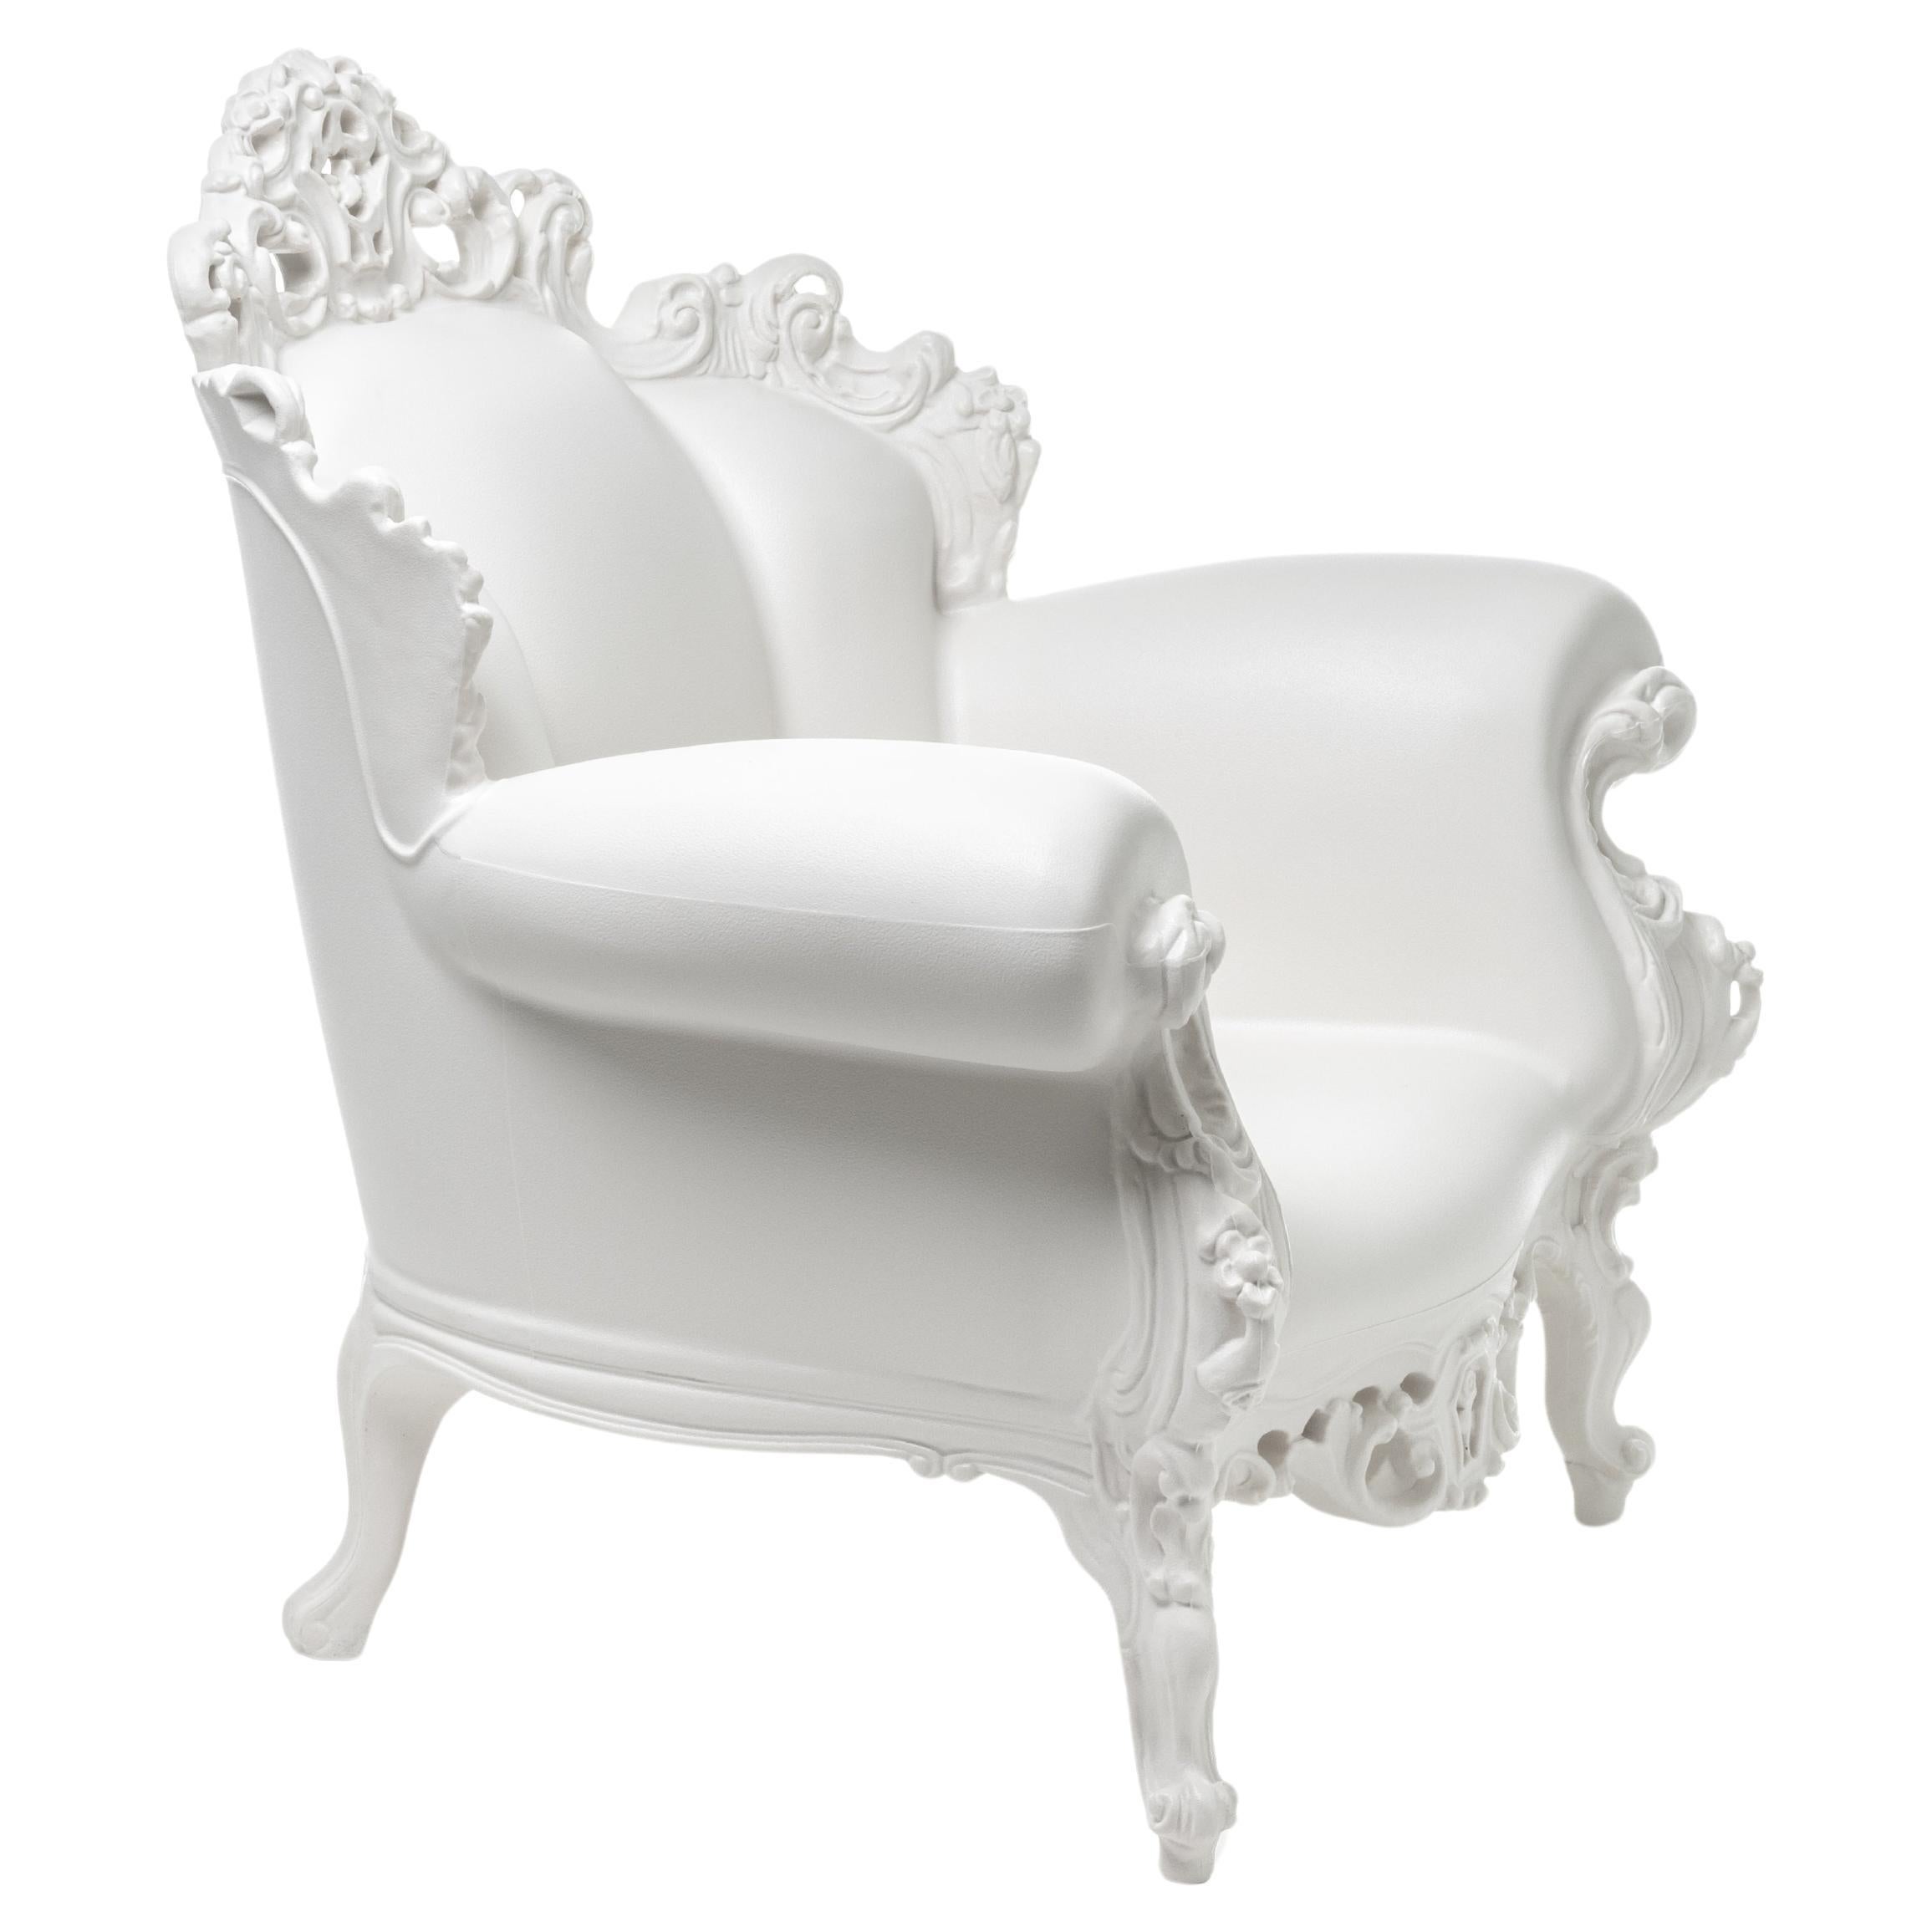 Magis Proust LowChair in White by Alessandro Mendini